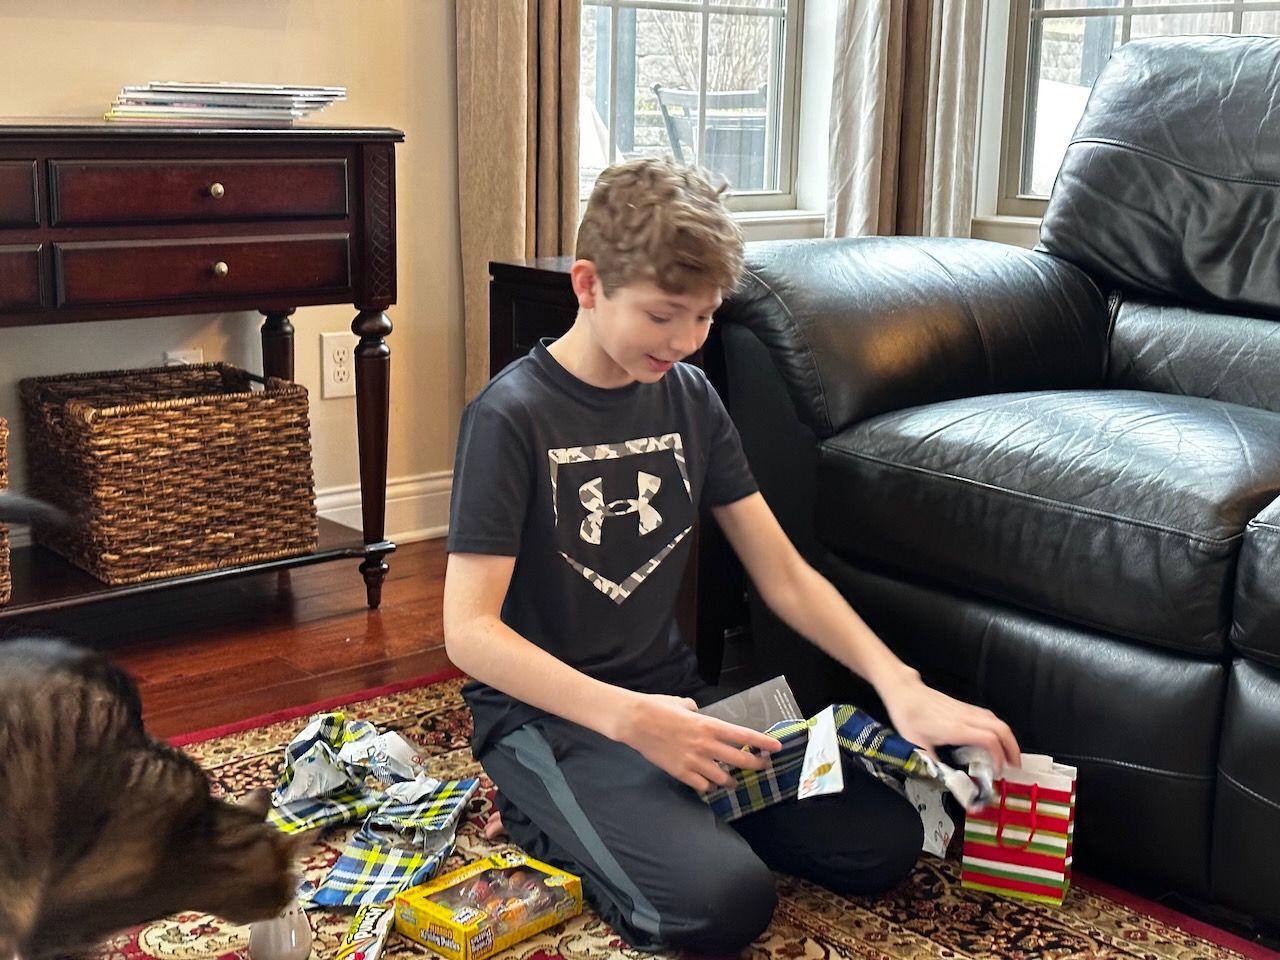 13 year old opening his birthday presents in the living room.